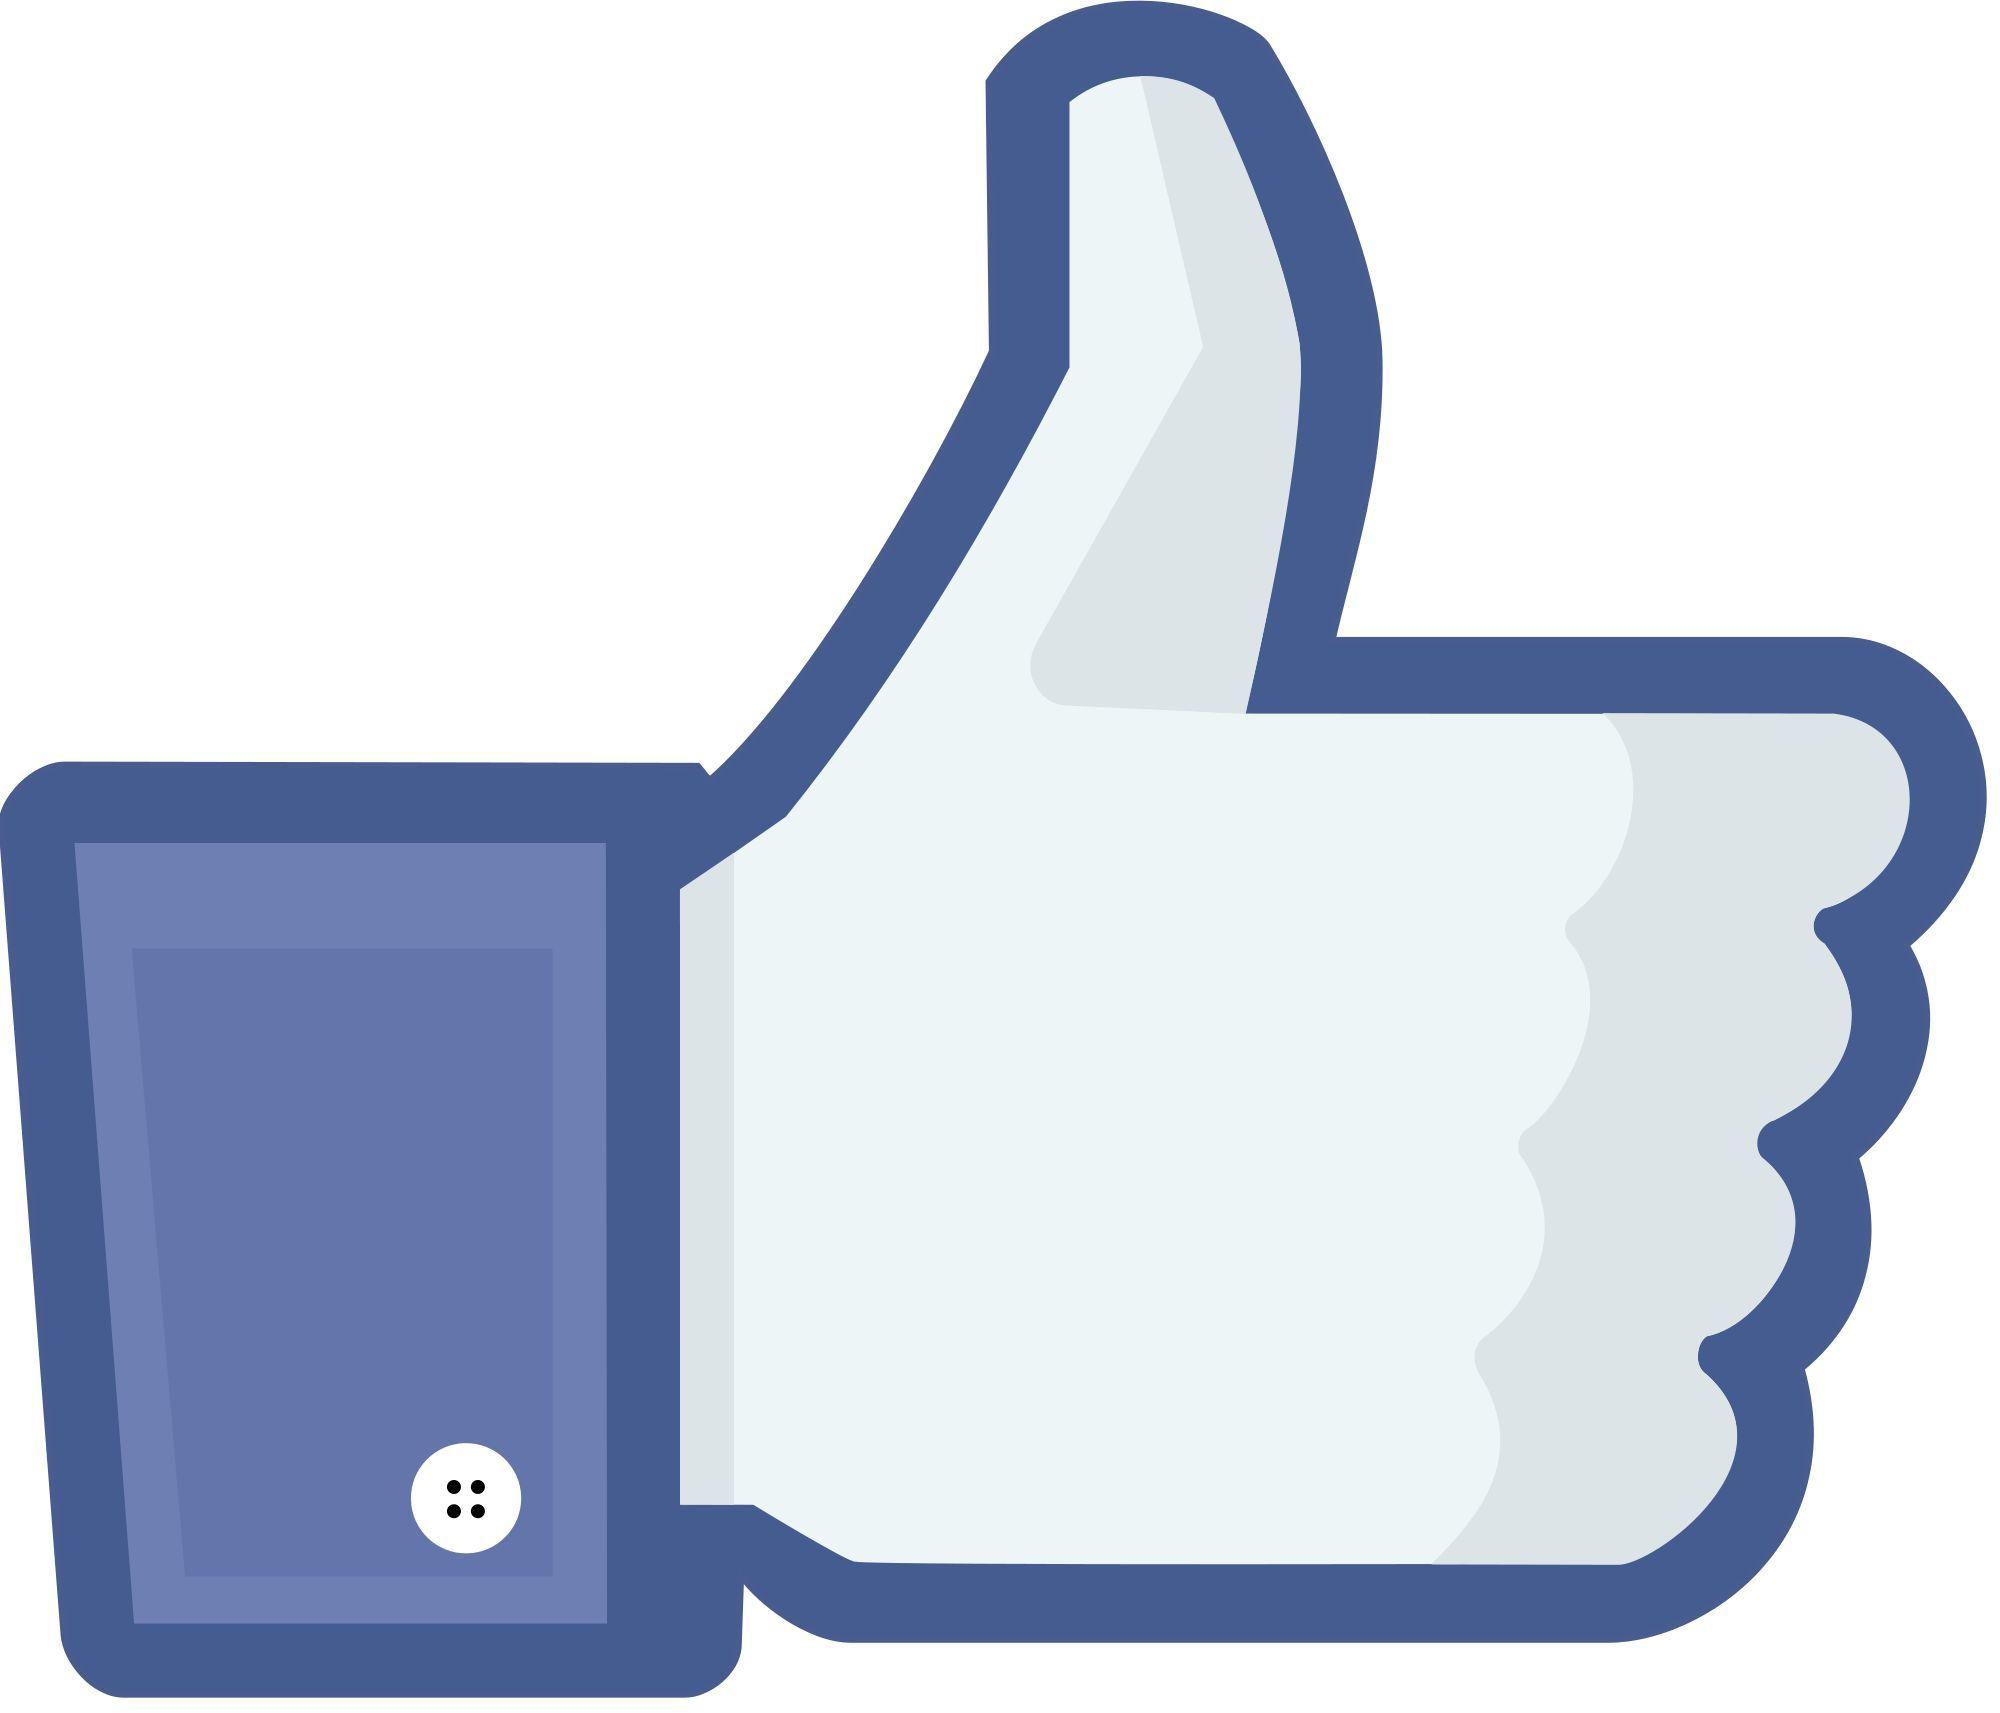 Big Facebook Logo - Facebook is making a big change to your news feed